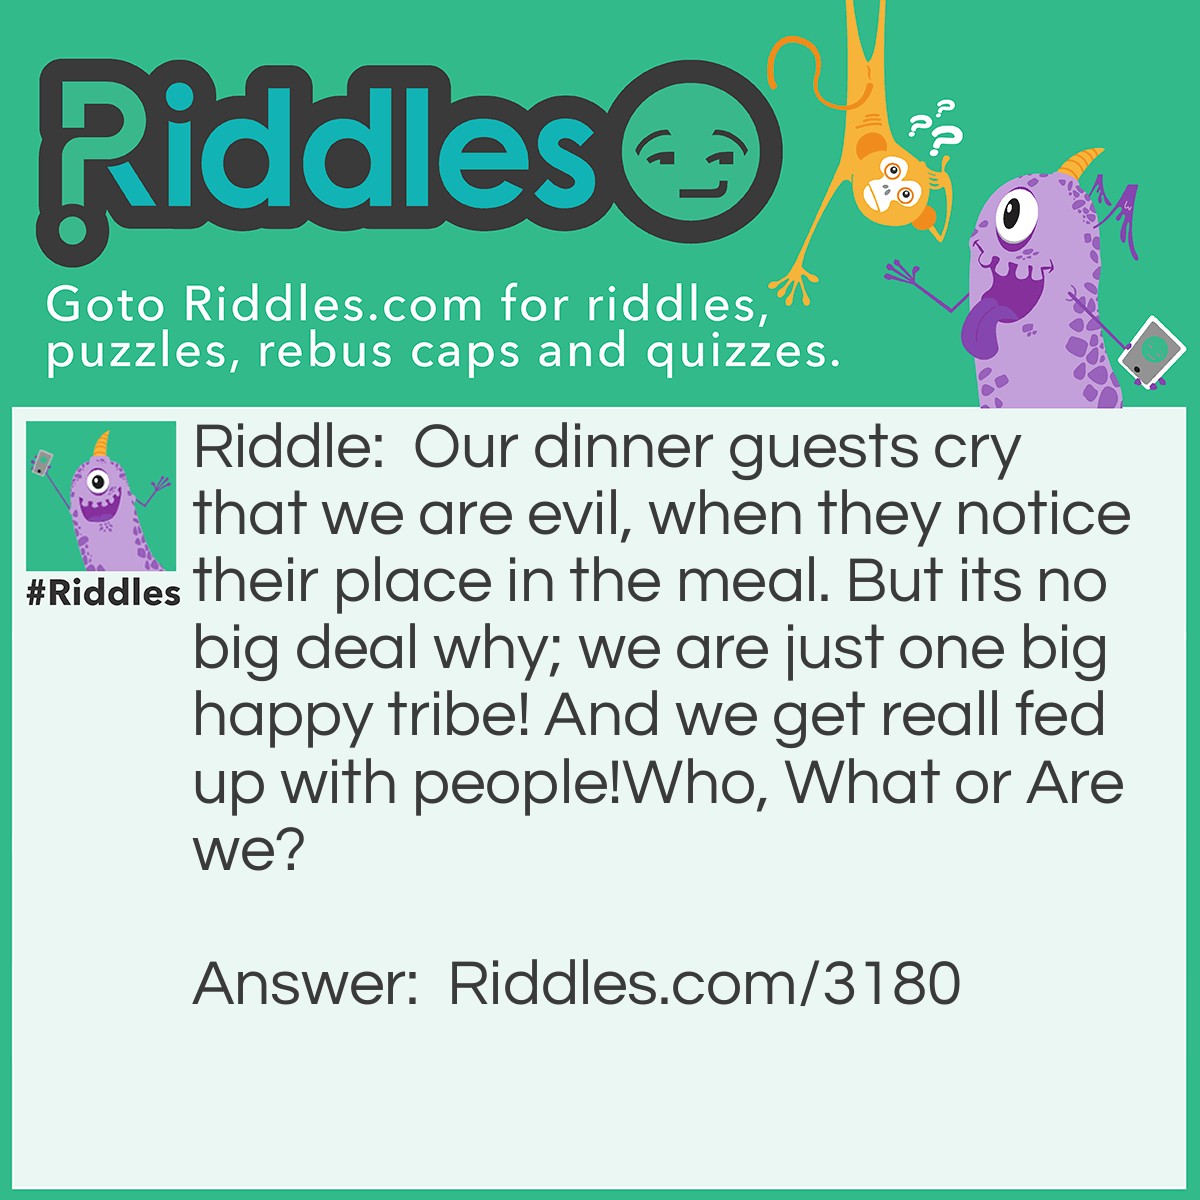 Riddle: Our dinner guests cry that we are evil, when they notice their place in the meal. But its no big deal why; we are just one big happy tribe! And we get reall fed up with people!
Who, What or Are we? Answer: Cannibals!